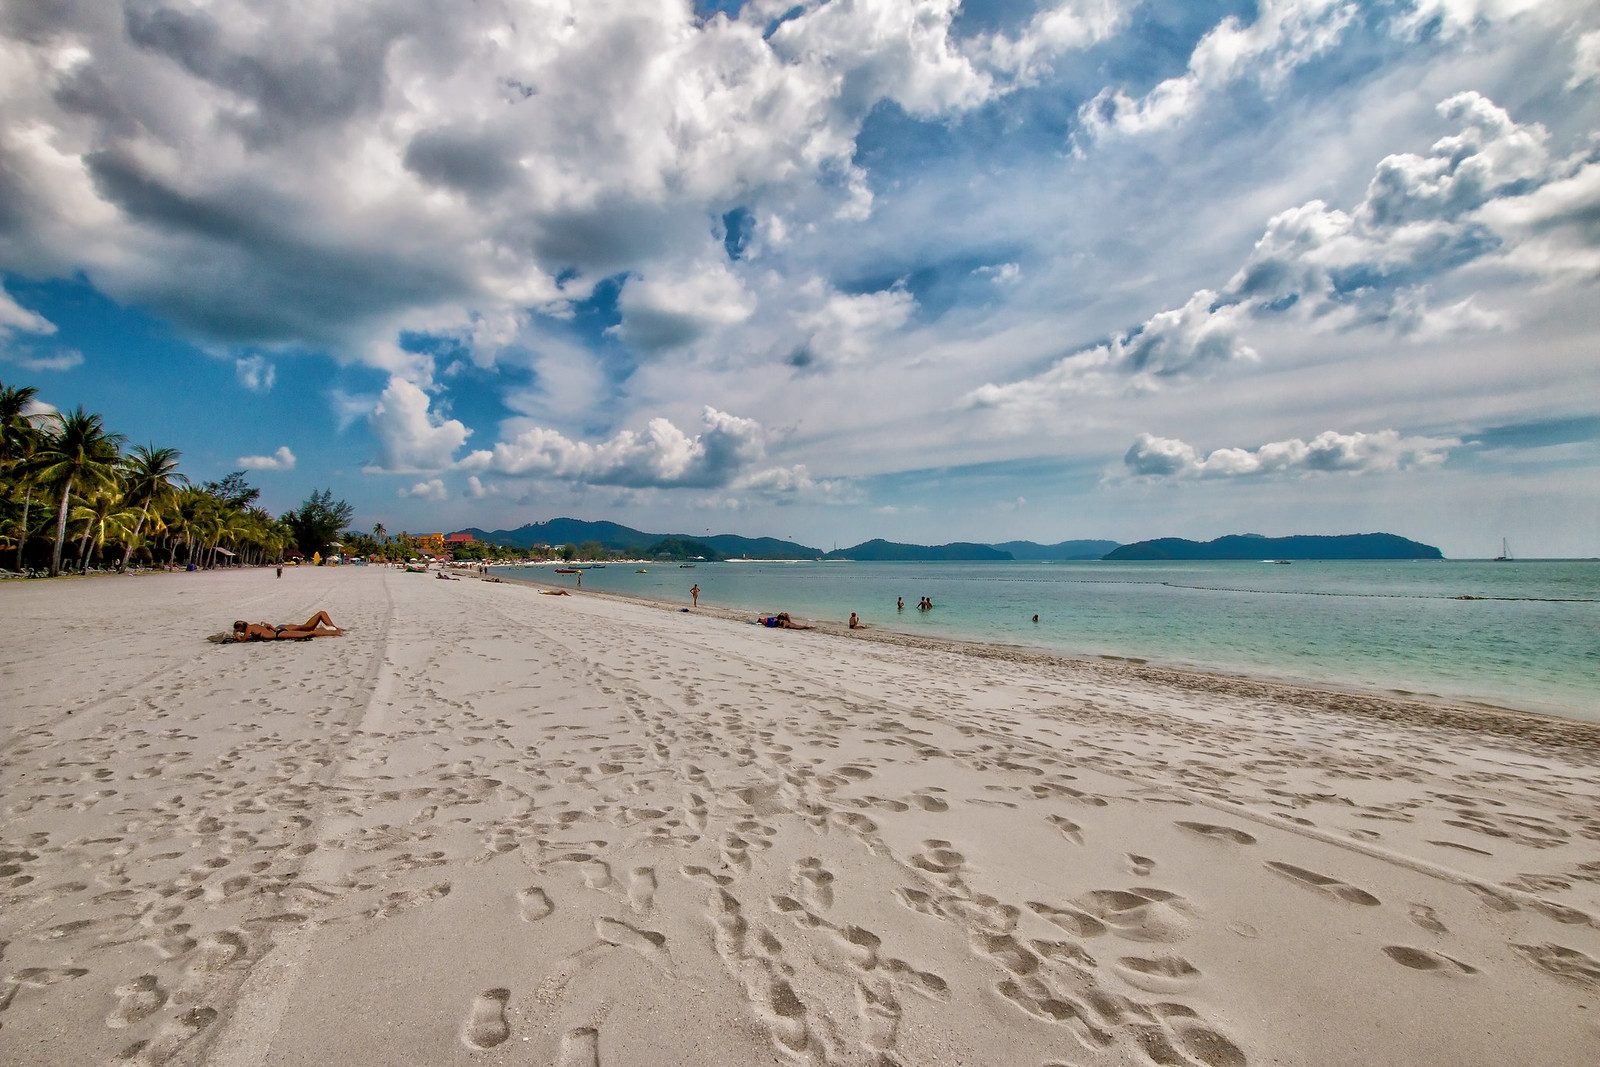 Where to stay in Langkawi